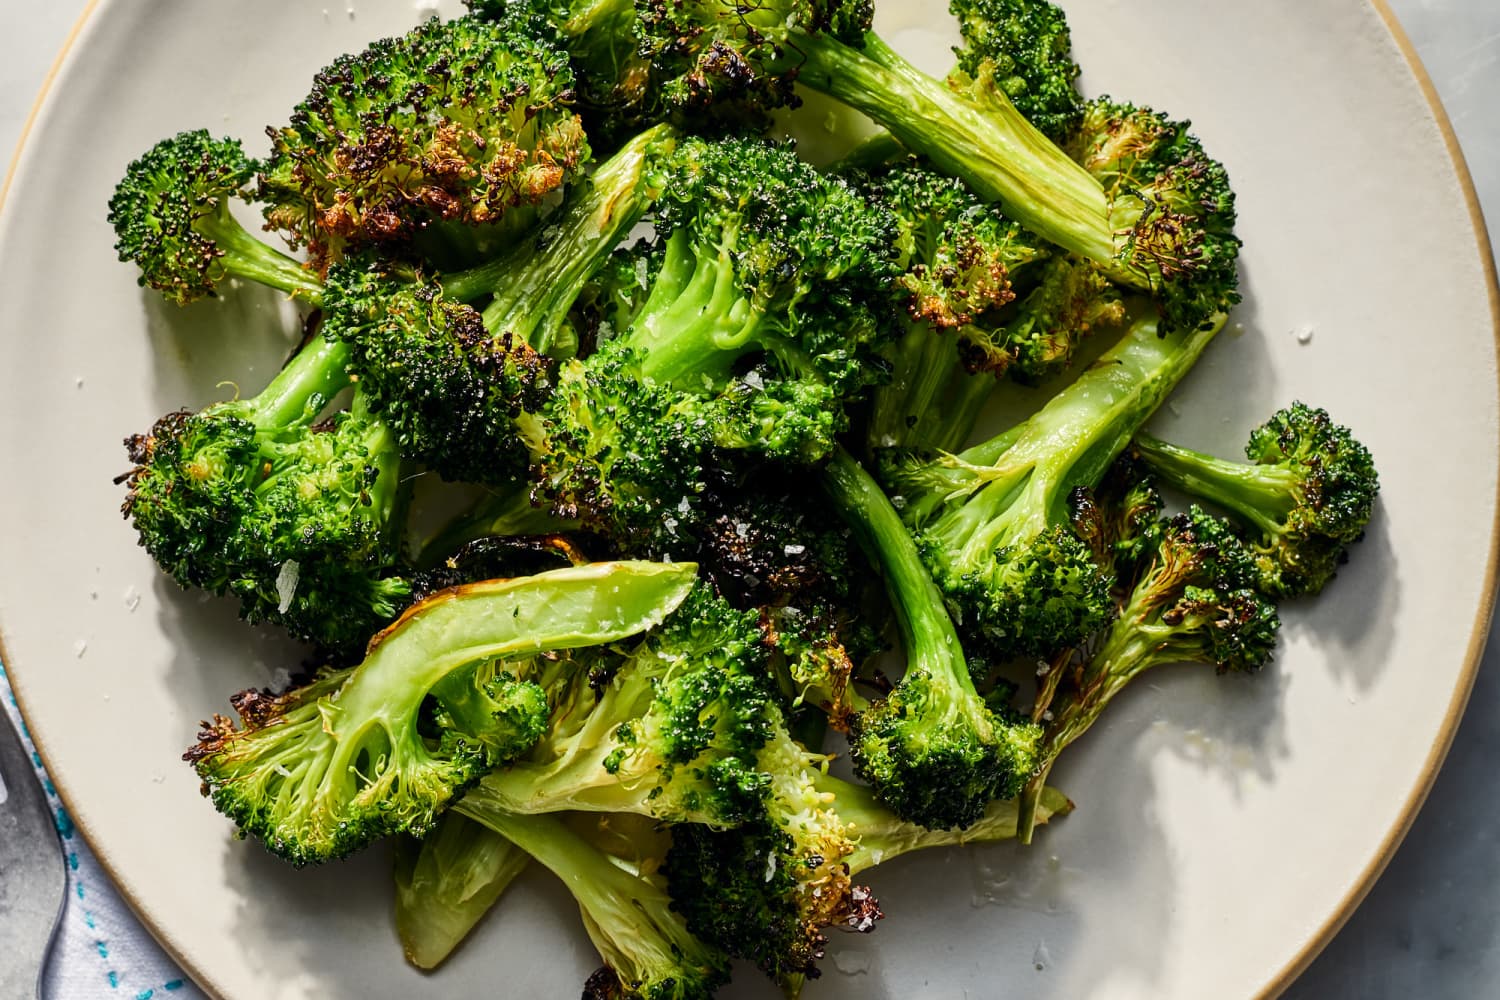 Air Fryer Broccoli Recipe (Ready in 15 Minutes) - The Kitchn